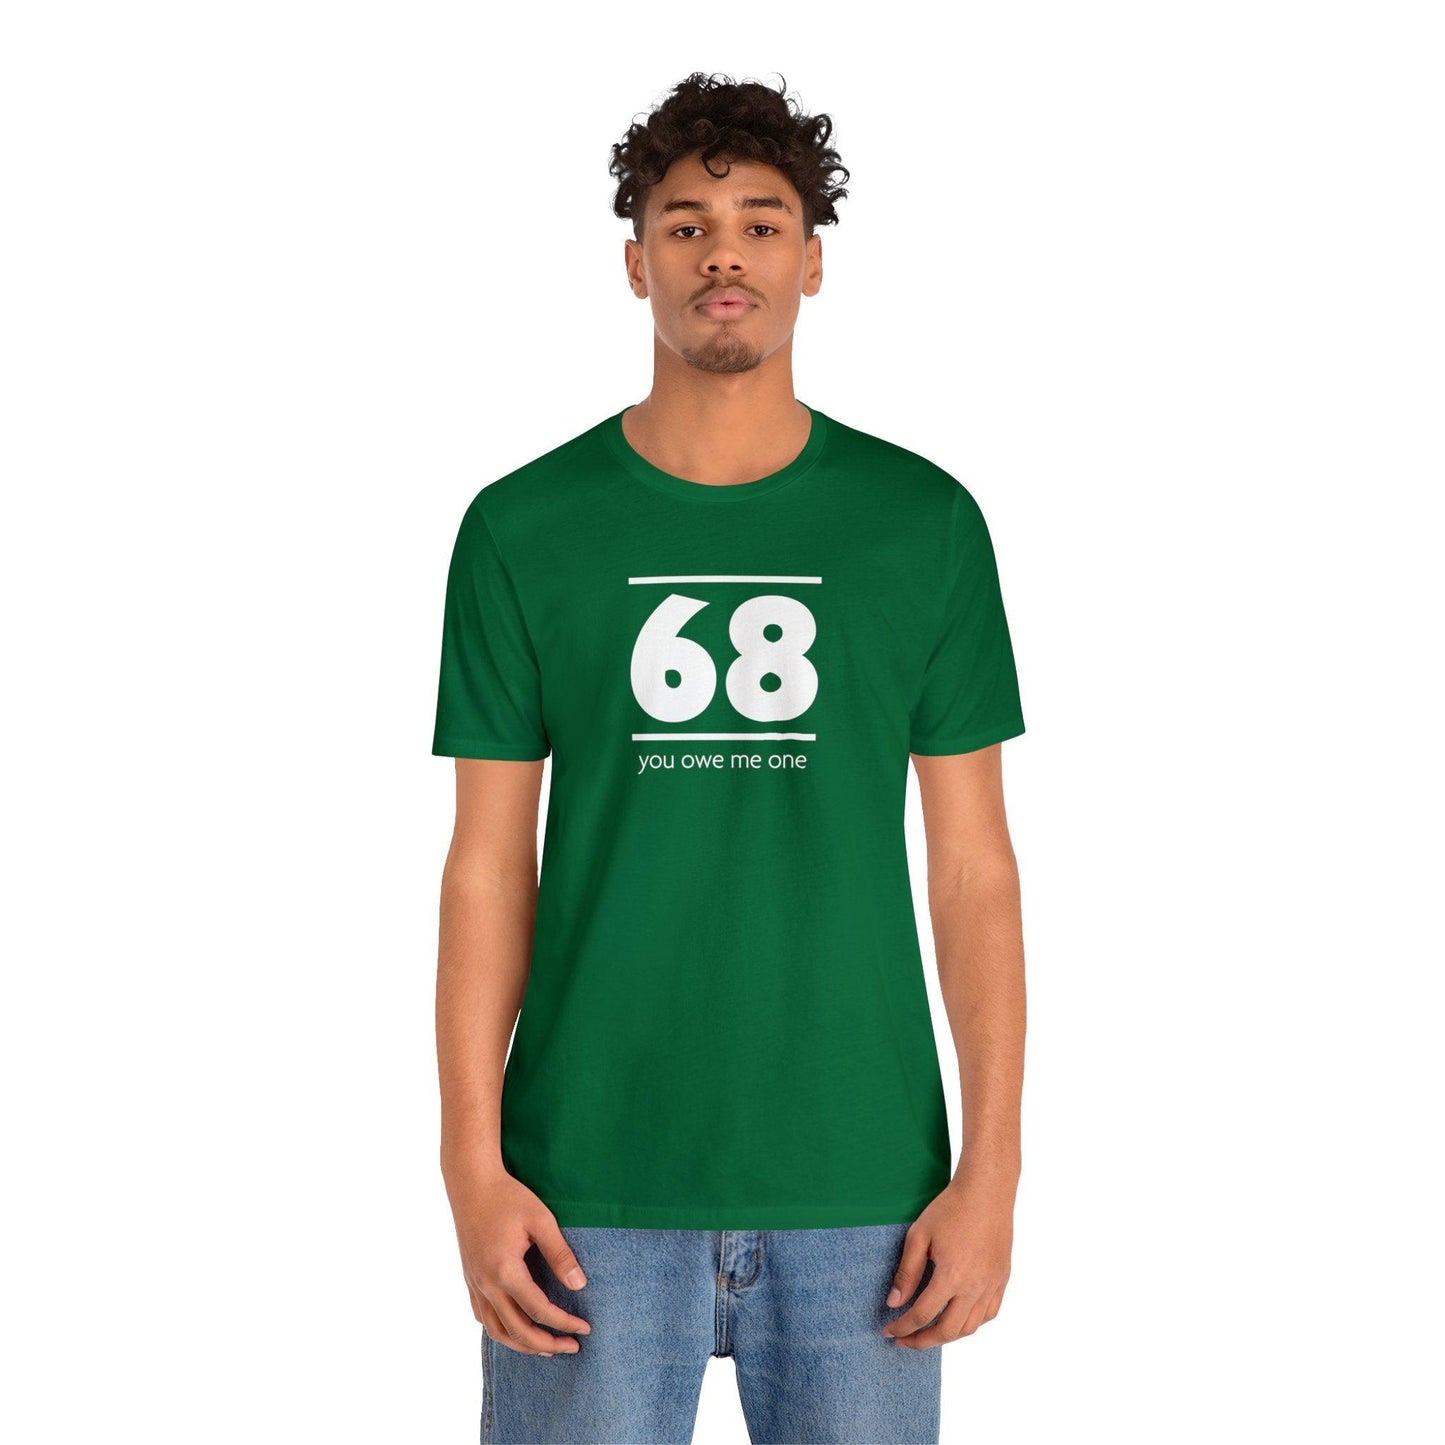 68, You Owe Me One - Wicked Naughty Apparel